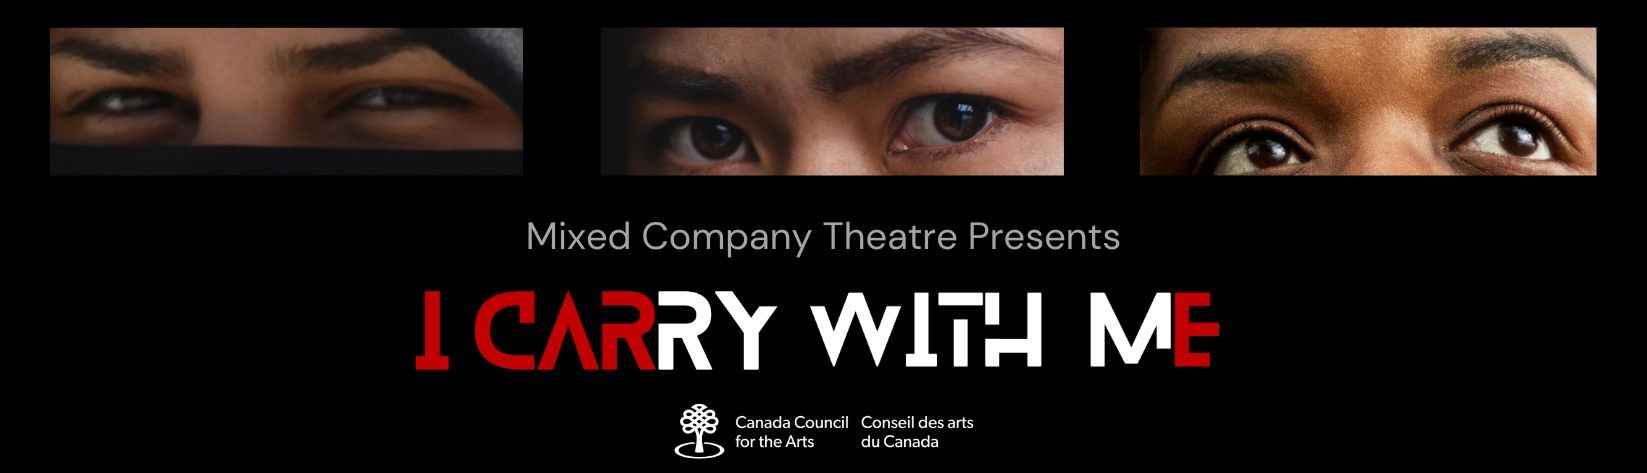 A promotional design for Mixed Company Theatre's presentation "I Carry with Me". 